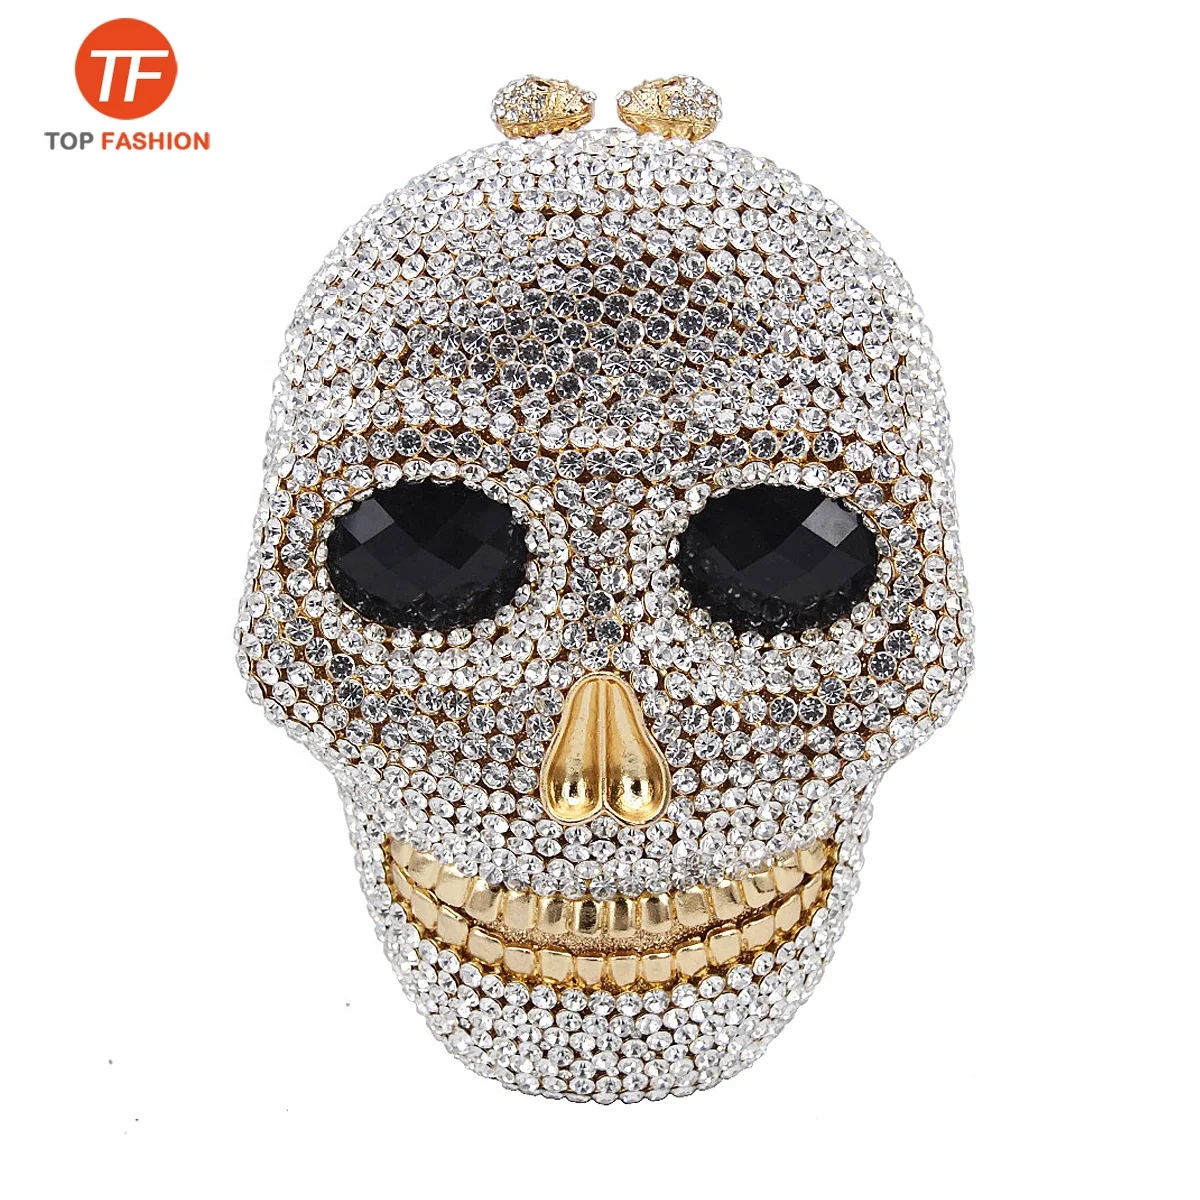 

China Factory Wholesales Luxury Crystal Rhinestone Clutch Evening Bag for Formal Party Diamond Skull Minaudiere Purse, ( accept customized )